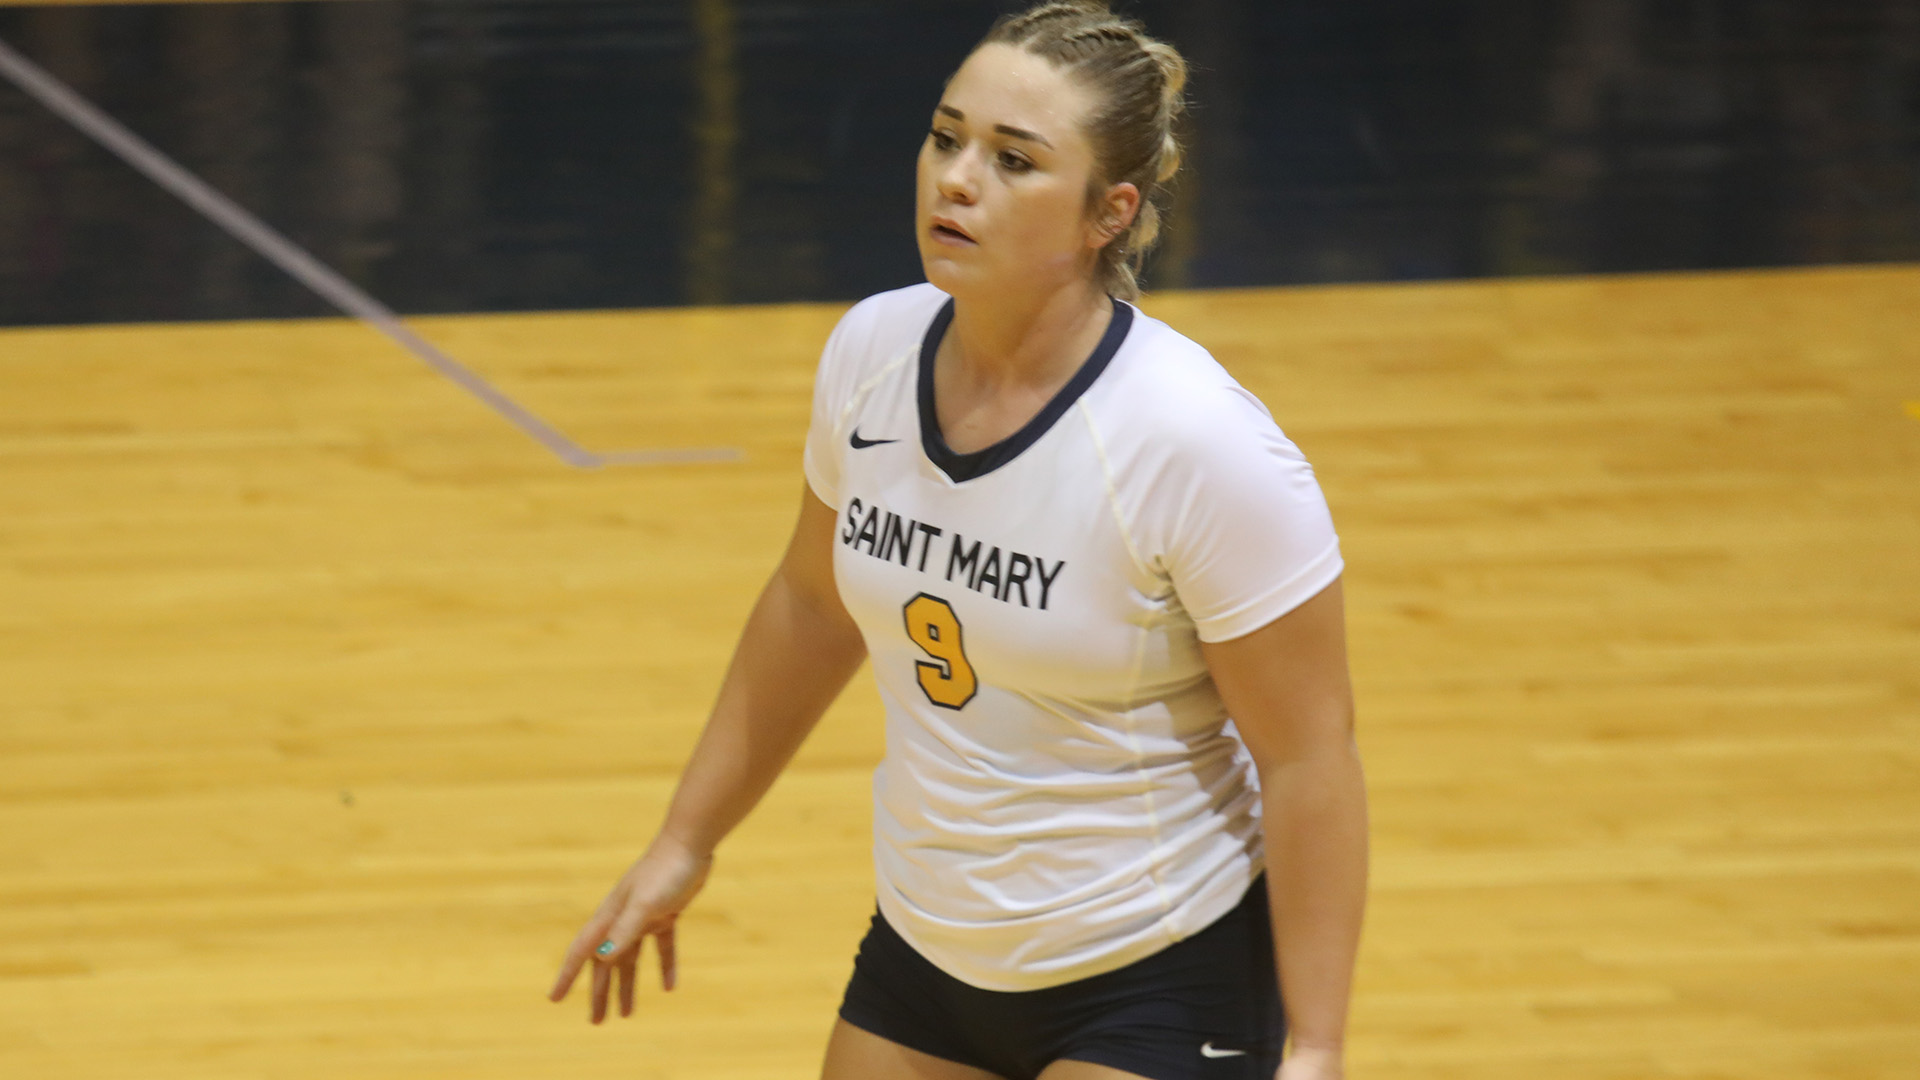 Kenitzer Breaks All-Time Kills Record in Win Over Swedes